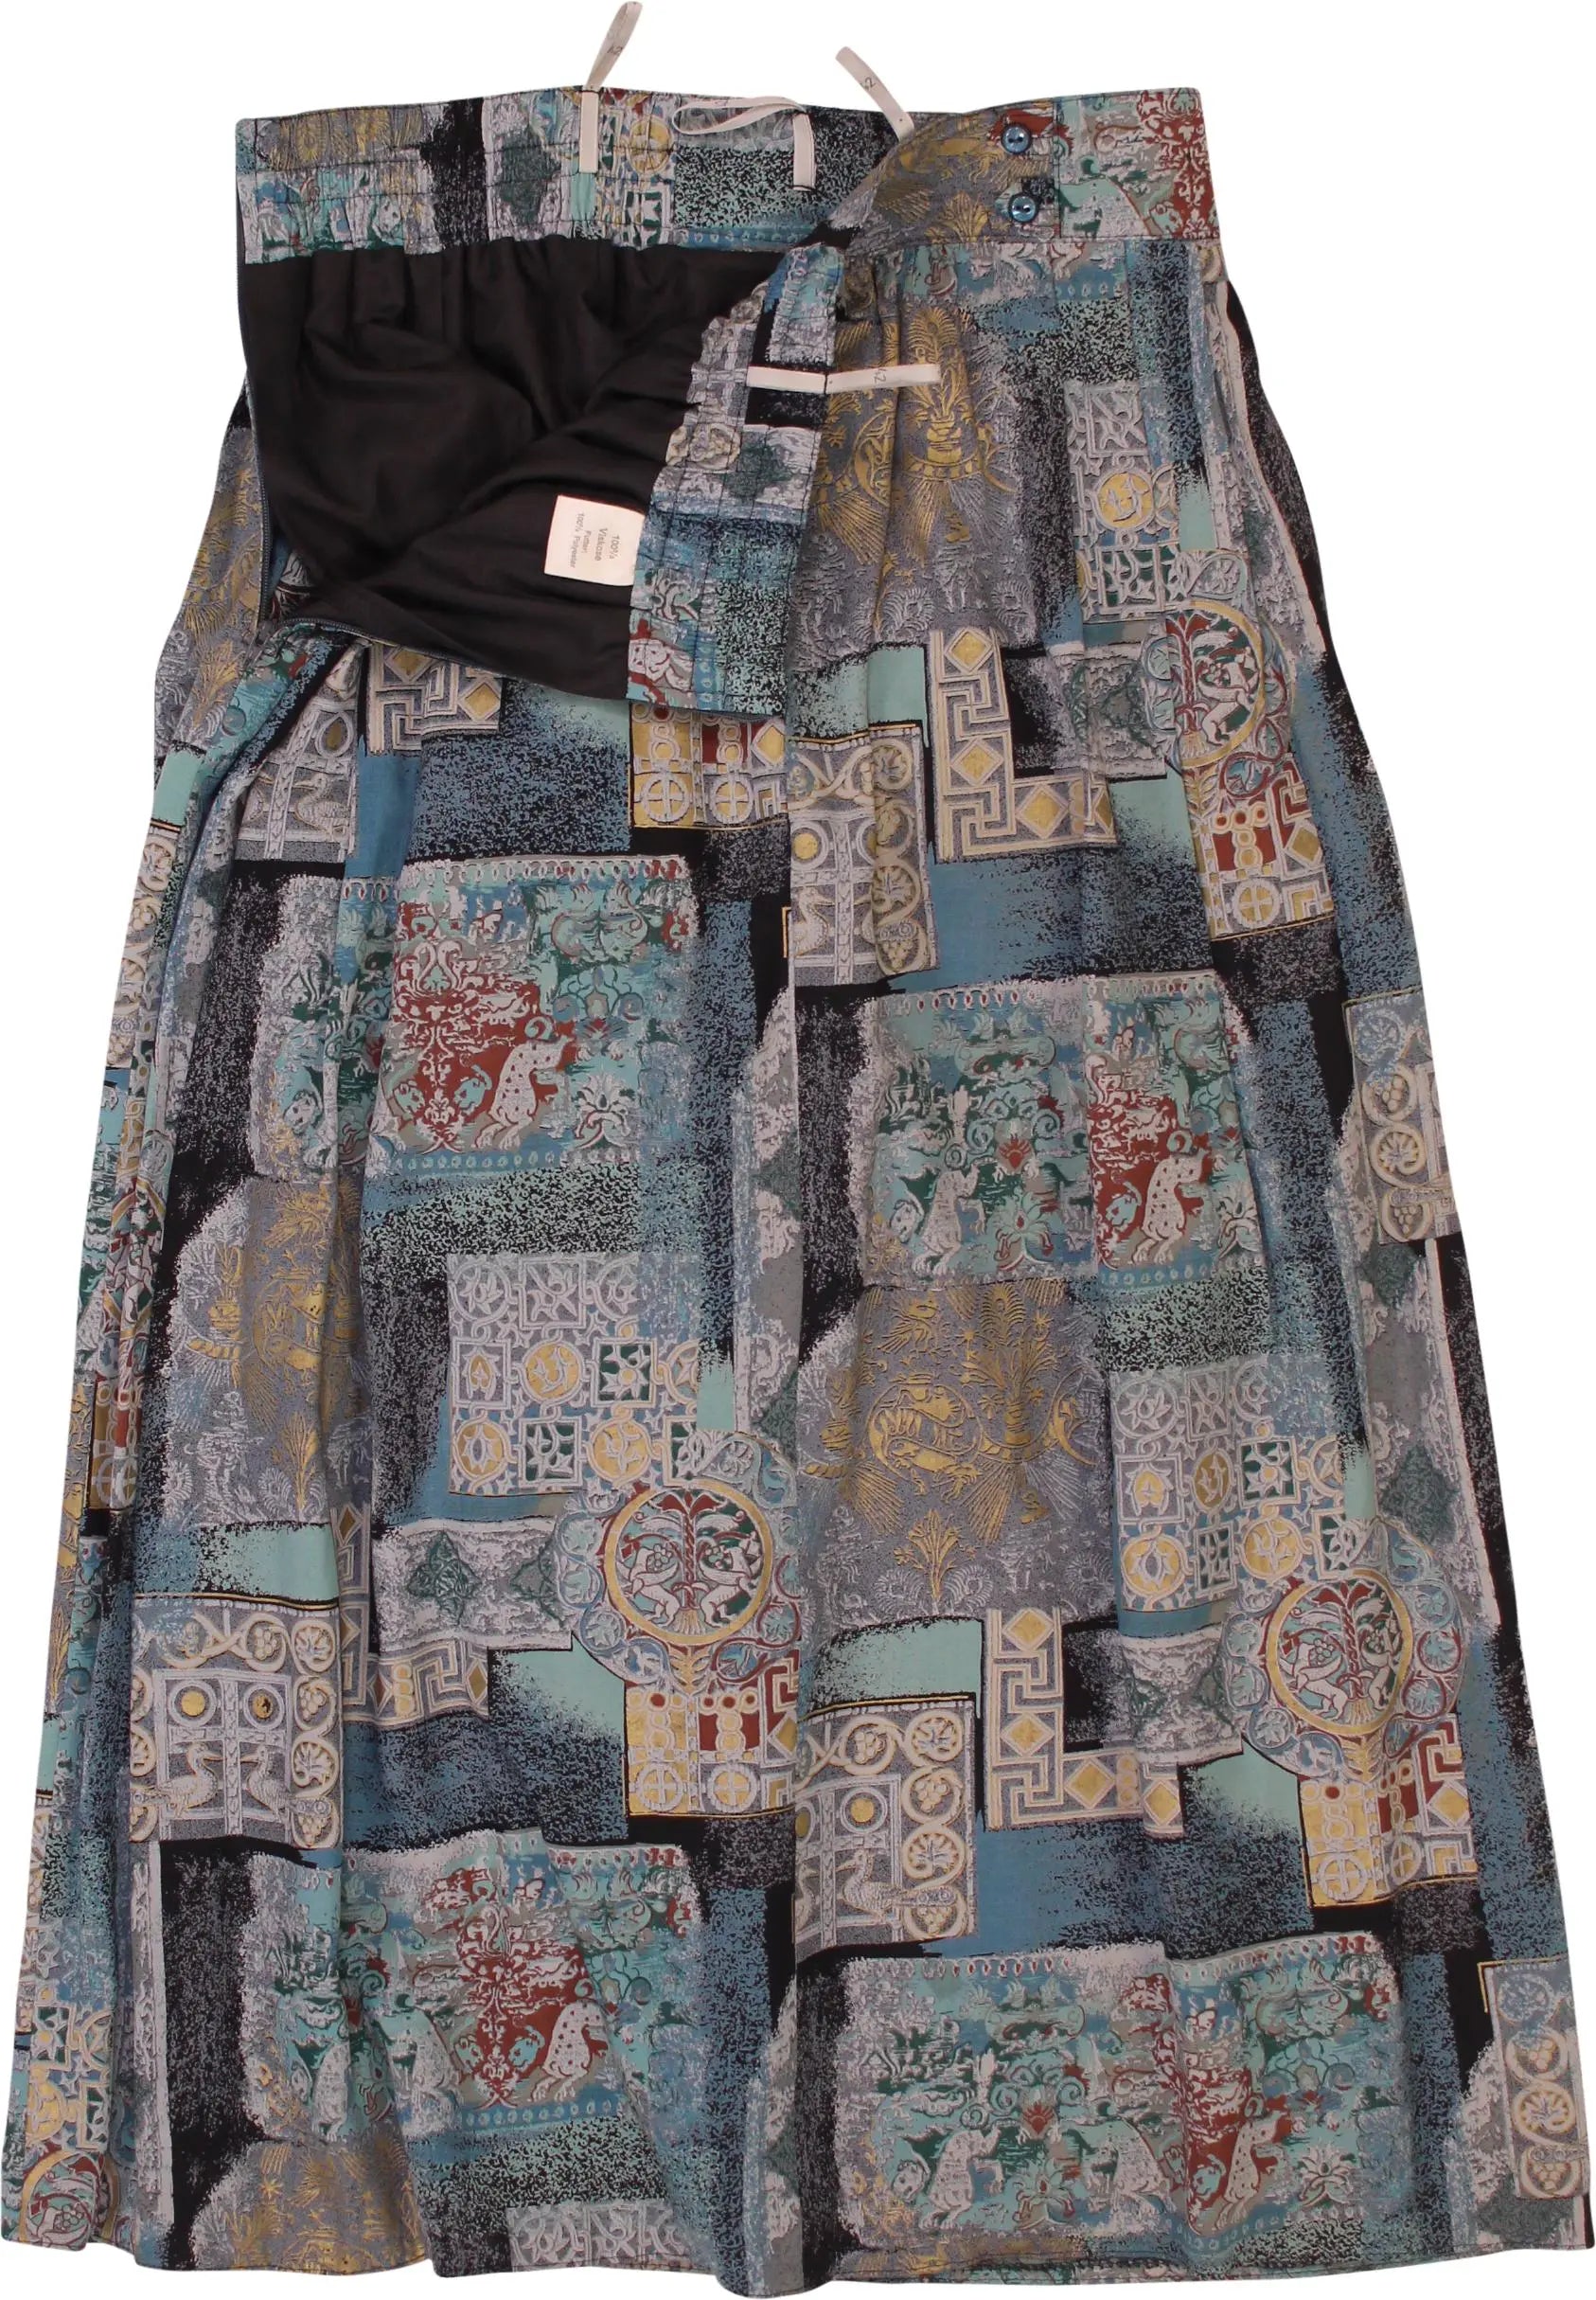 Unknown - 80s Skirt with Patchwork Print- ThriftTale.com - Vintage and second handclothing